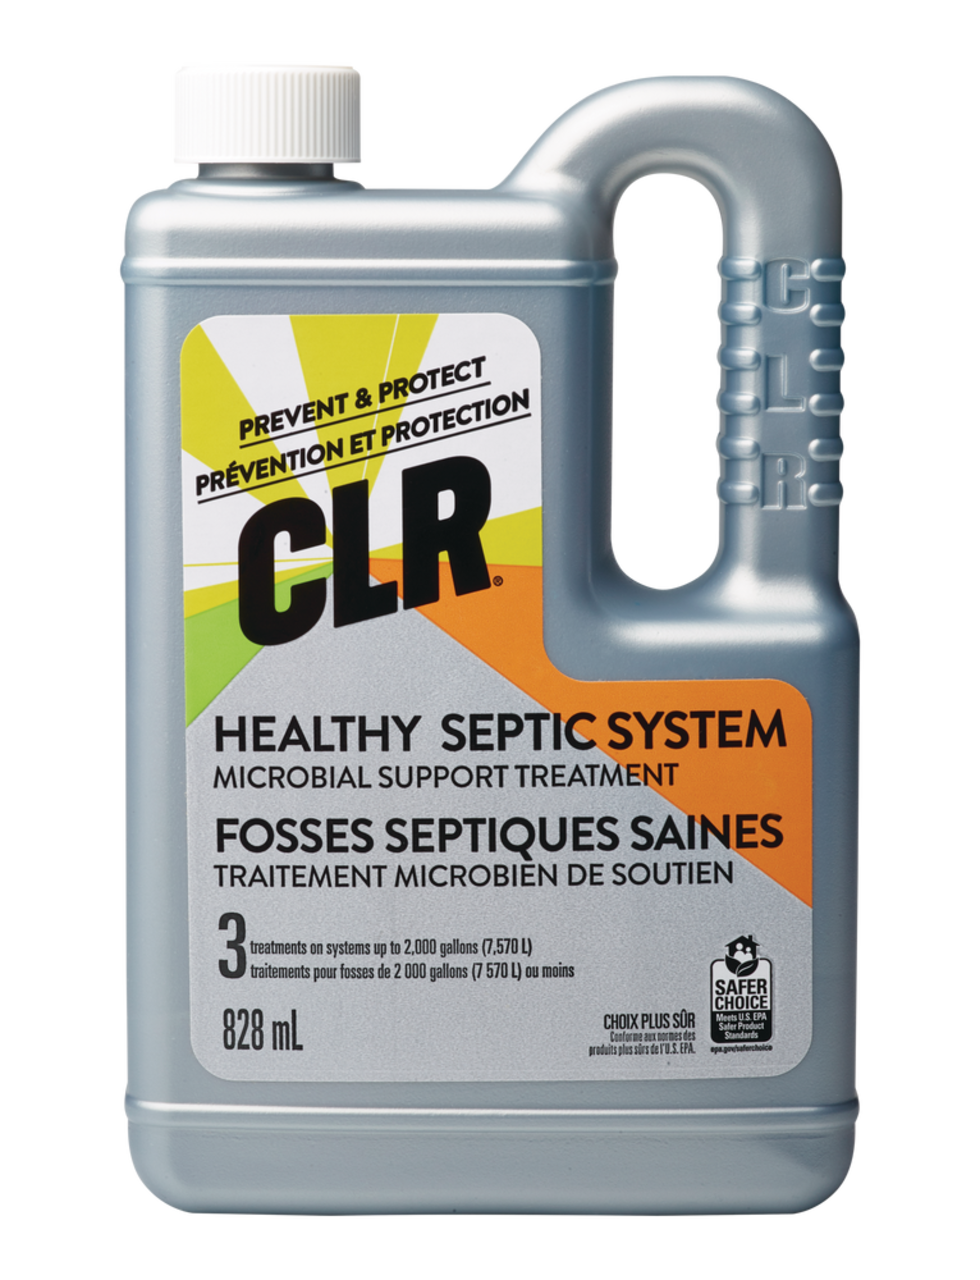 What Drain Cleaner Is Safe for Septic Systems?